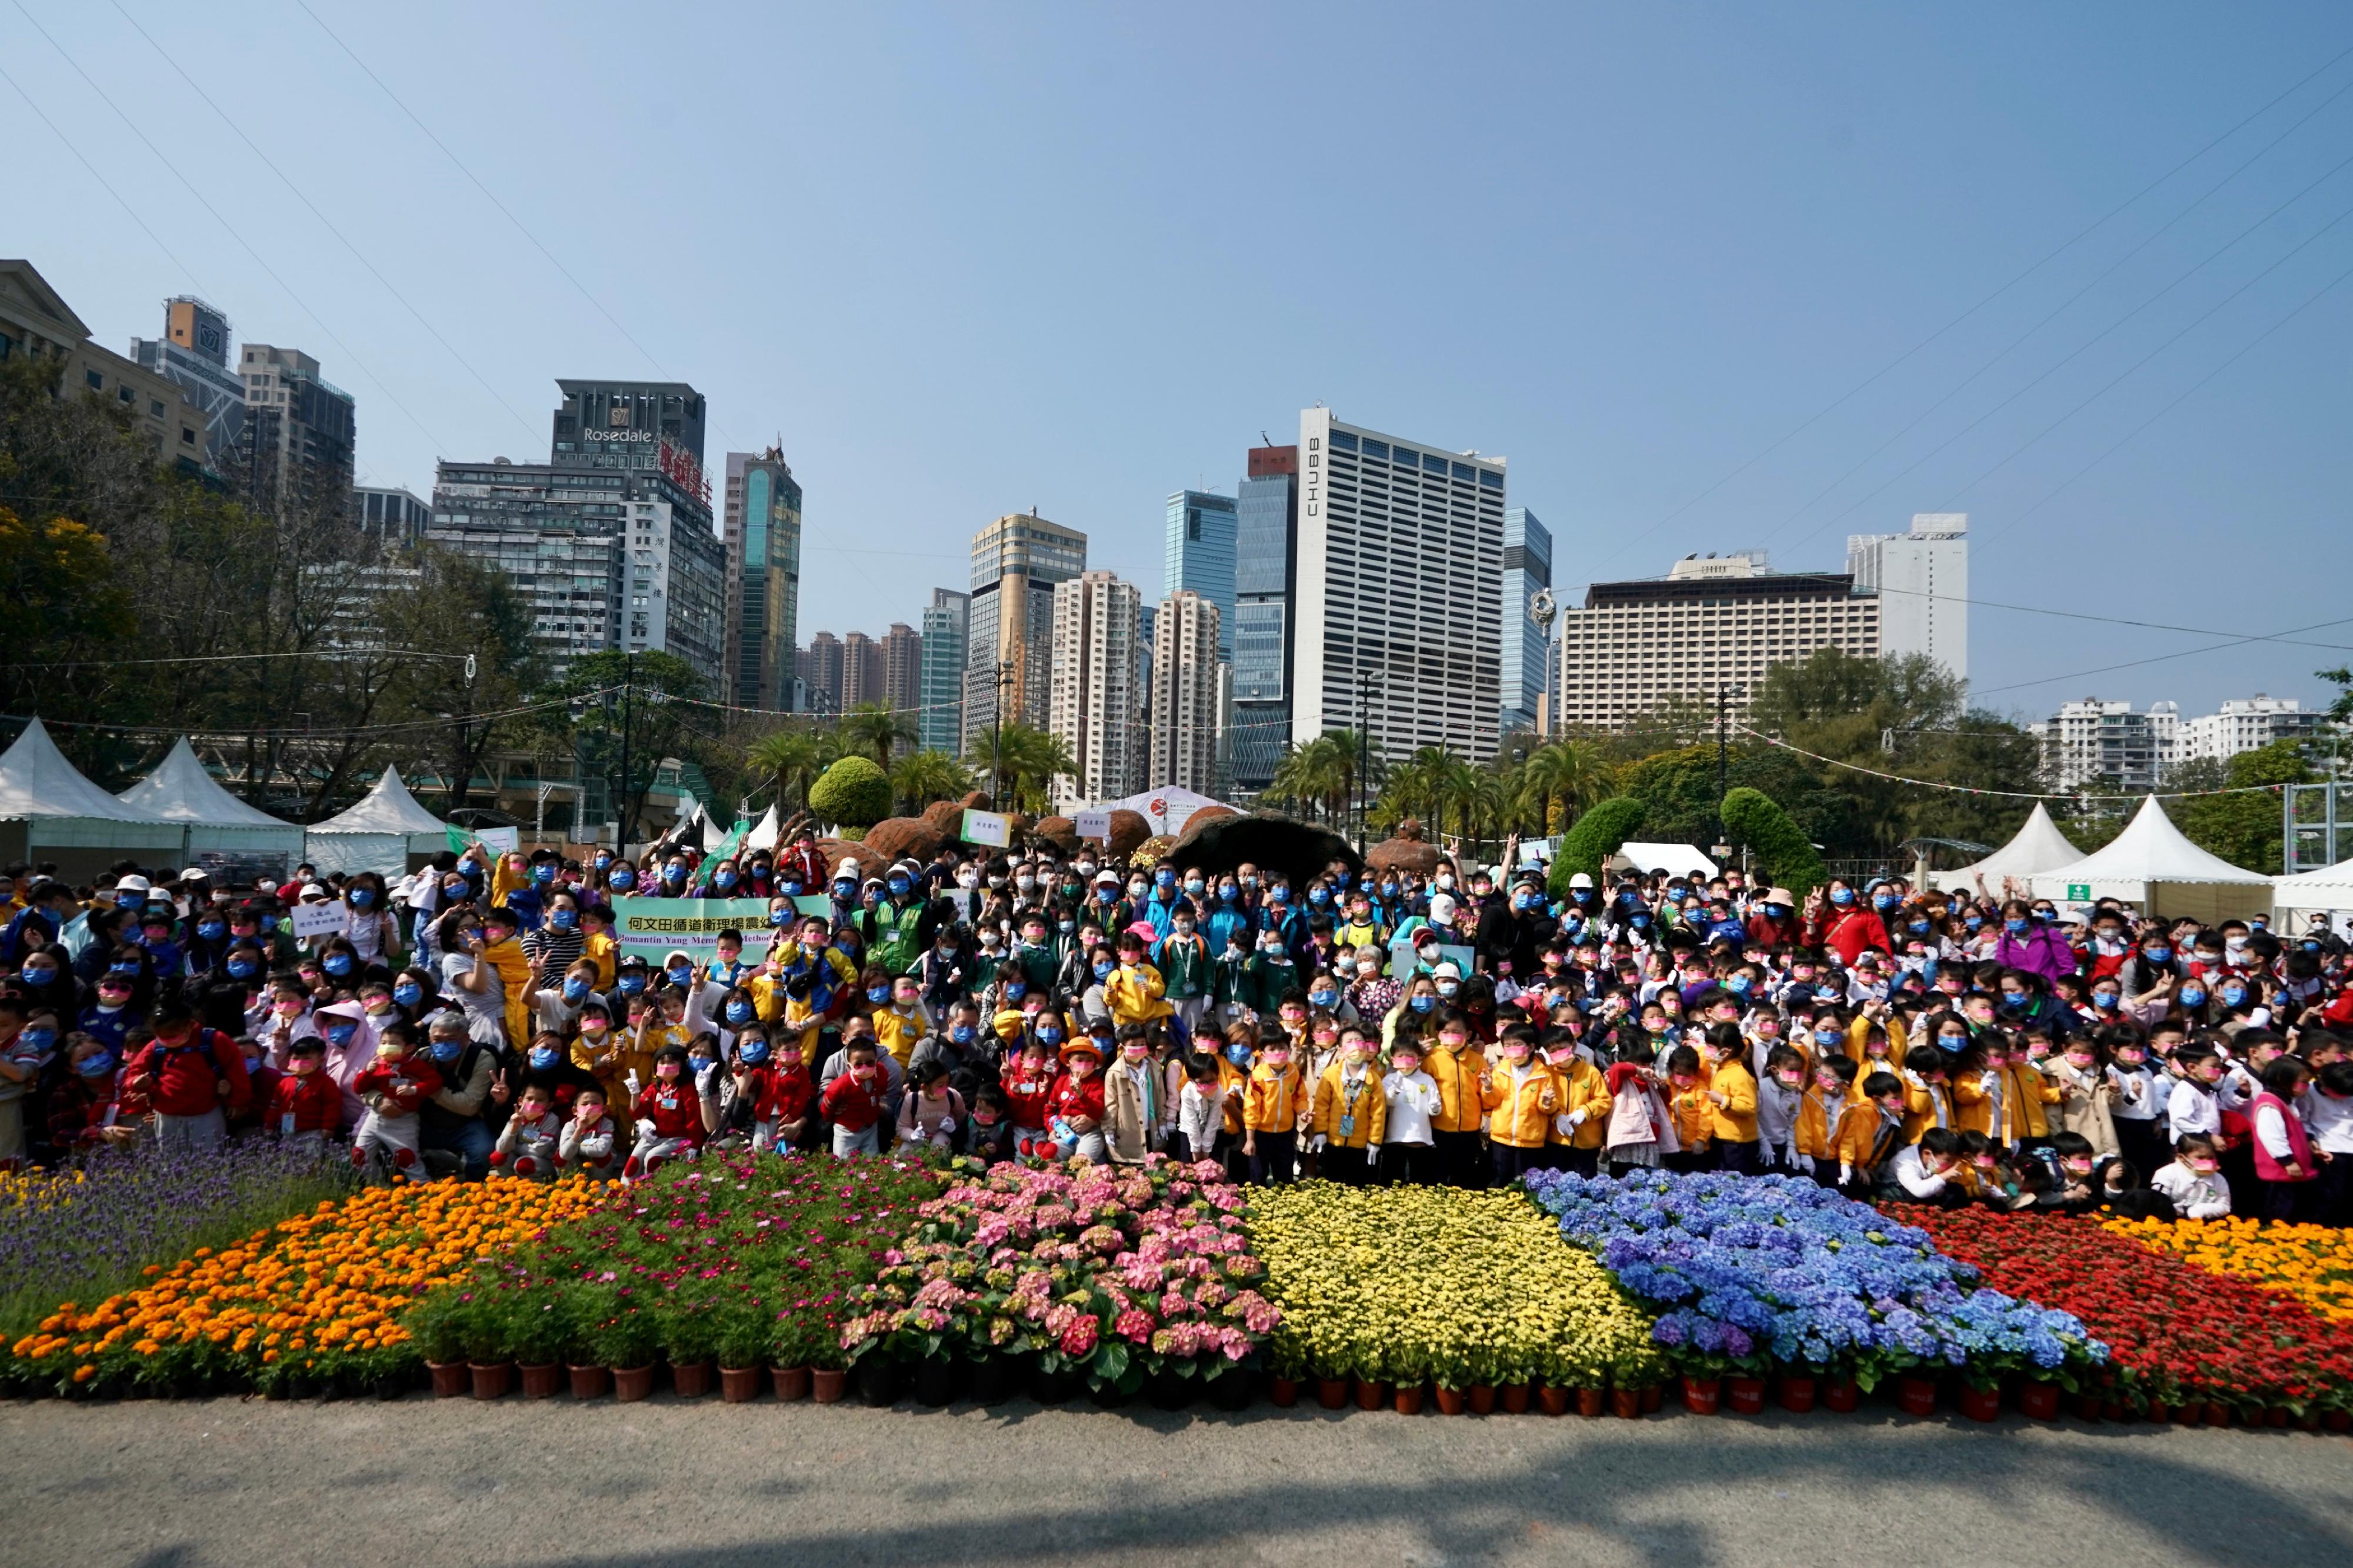 About 1 000 students from 32 schools worked together to help put on the spectacular horticultural display "Midsummer Jubilation" at Victoria Park today (February 25). The display will be embellished with about 40 000 colourful flowers and plants of various species.